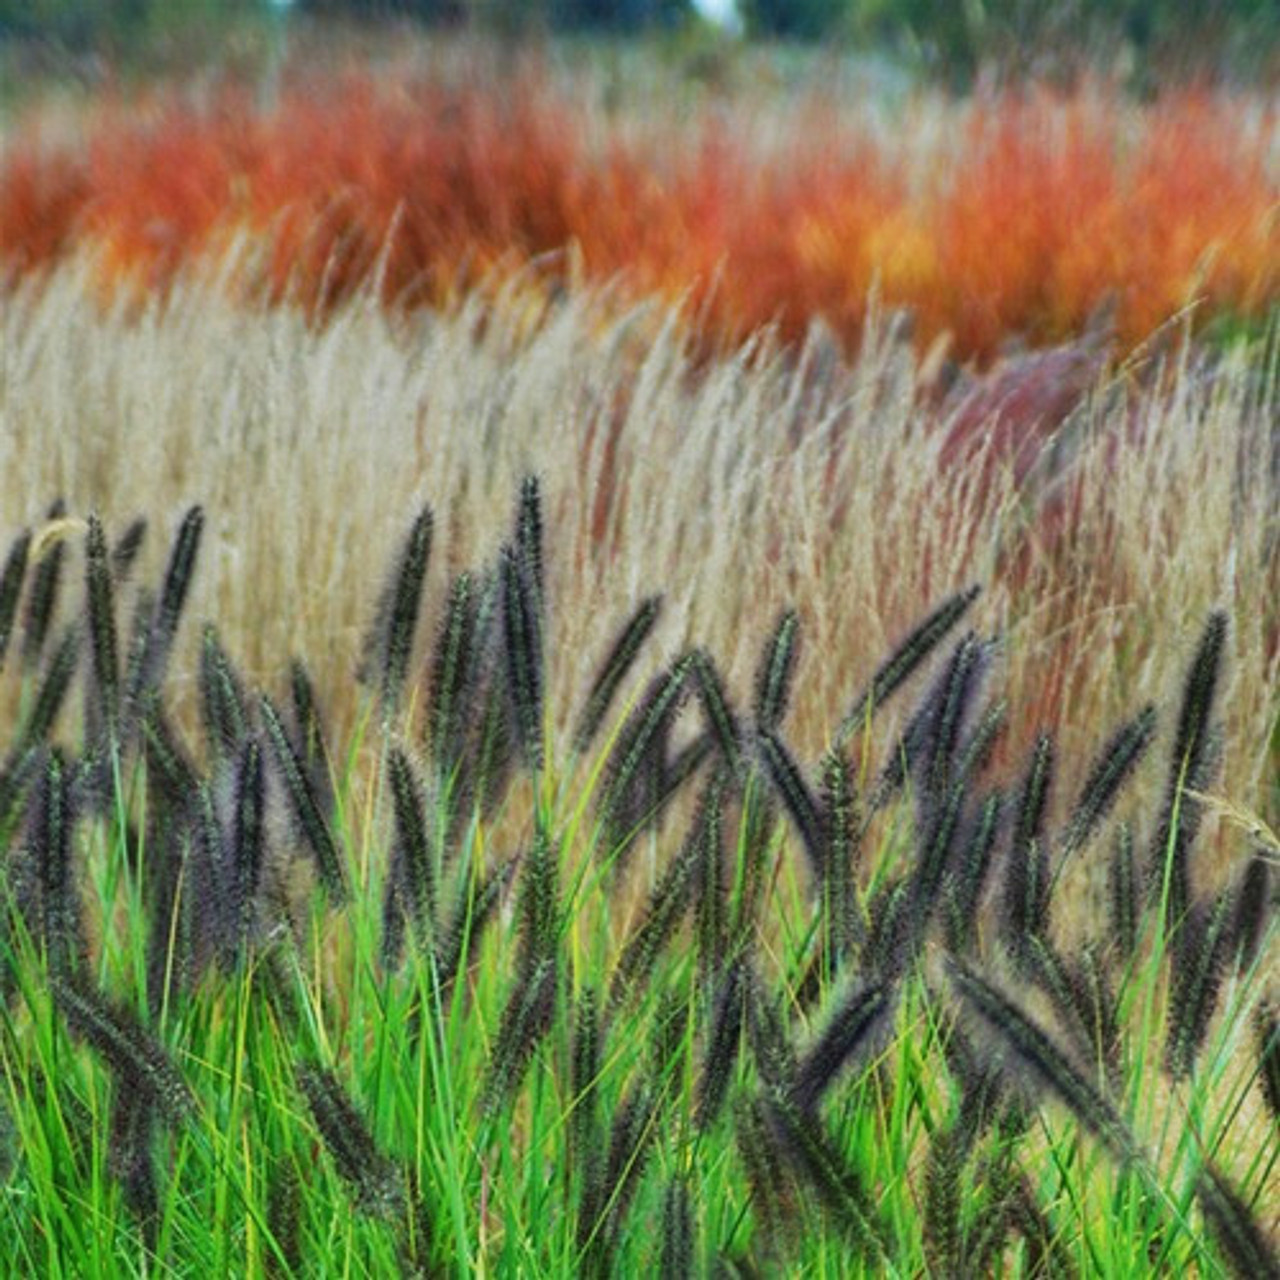 Pennisetum liners from Coast Growers